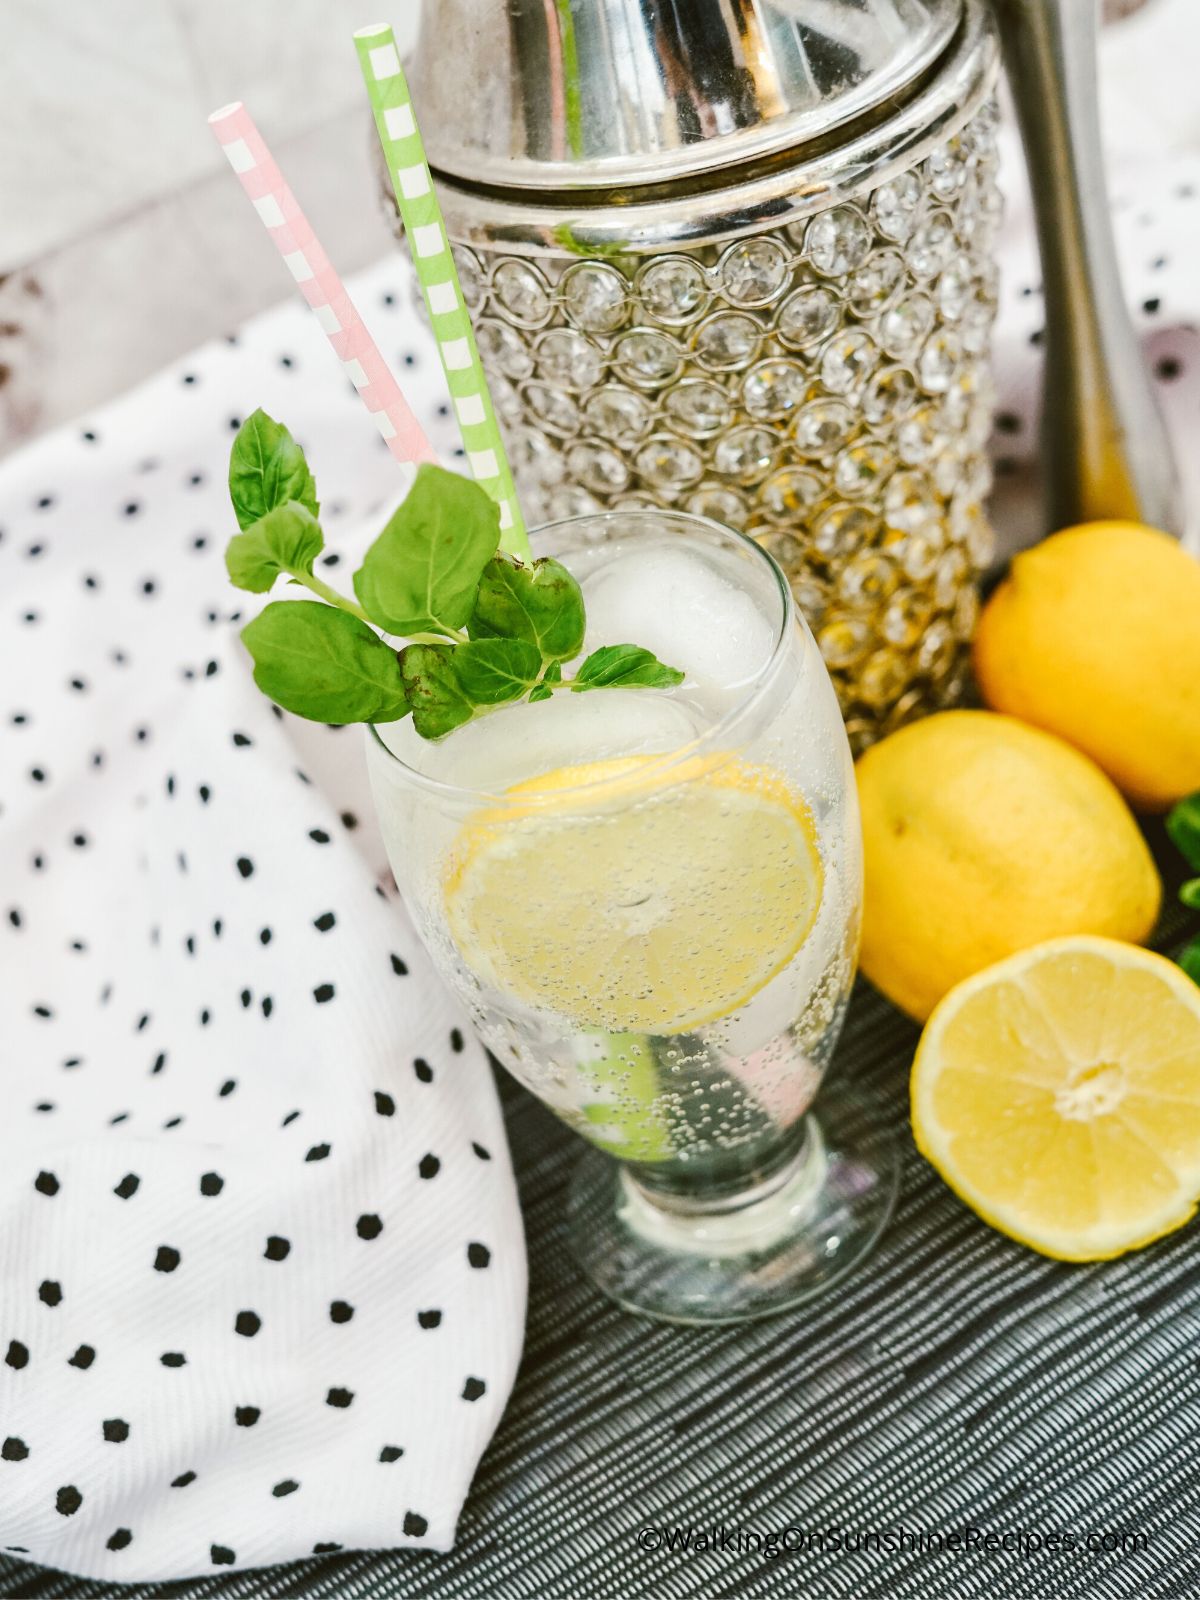 seltzer water and lemon.